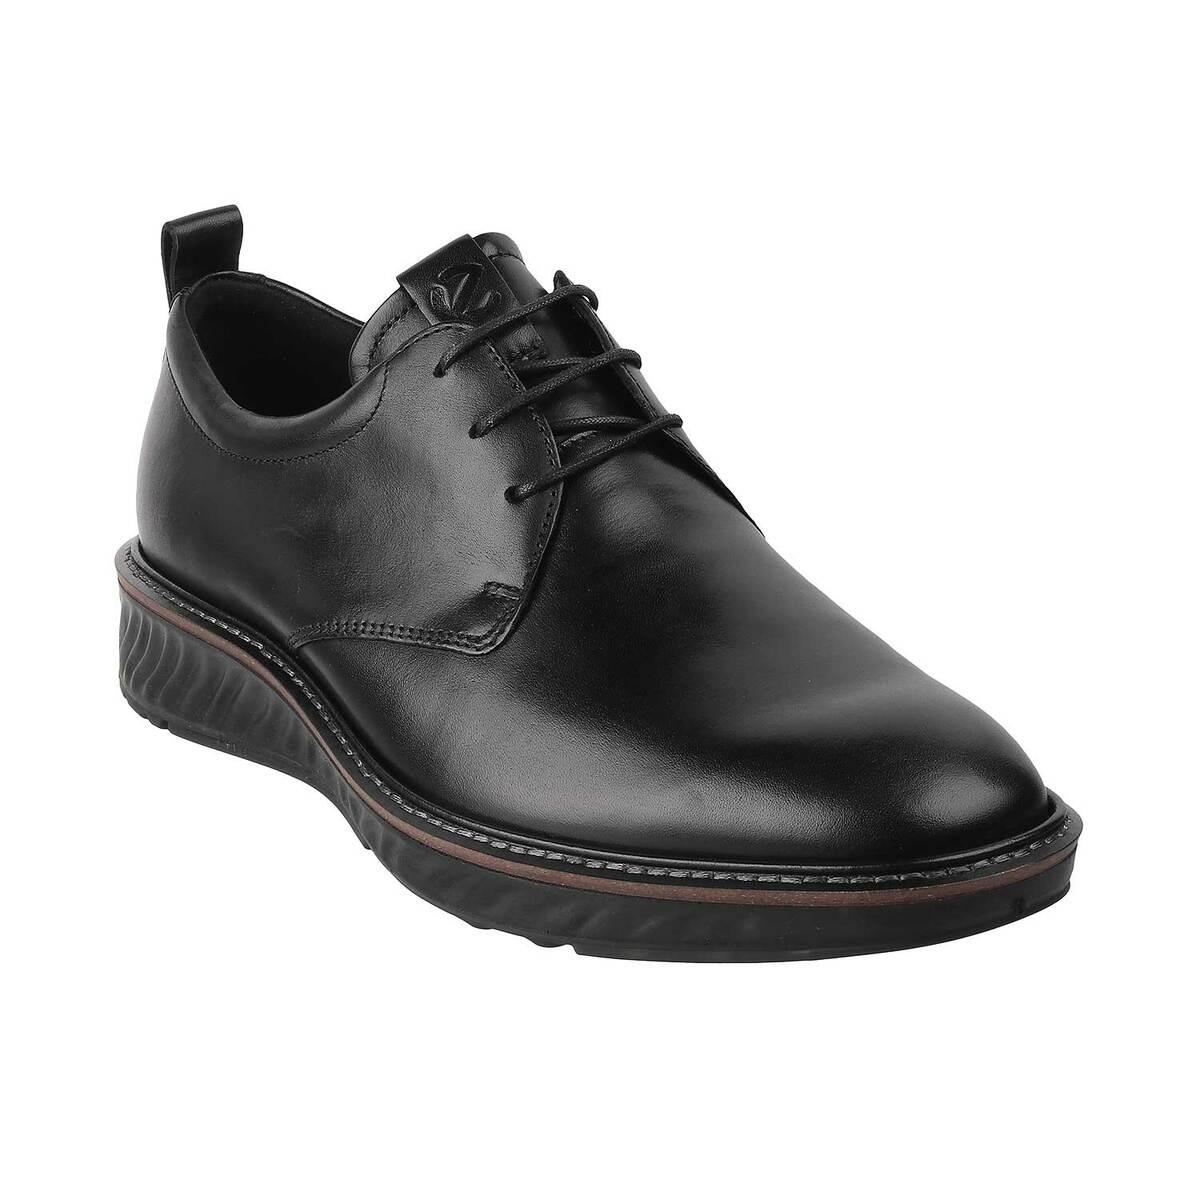 Buy Male Black Formal Lace Up Online | SKU: 339-836404-11-42-Metro Shoes